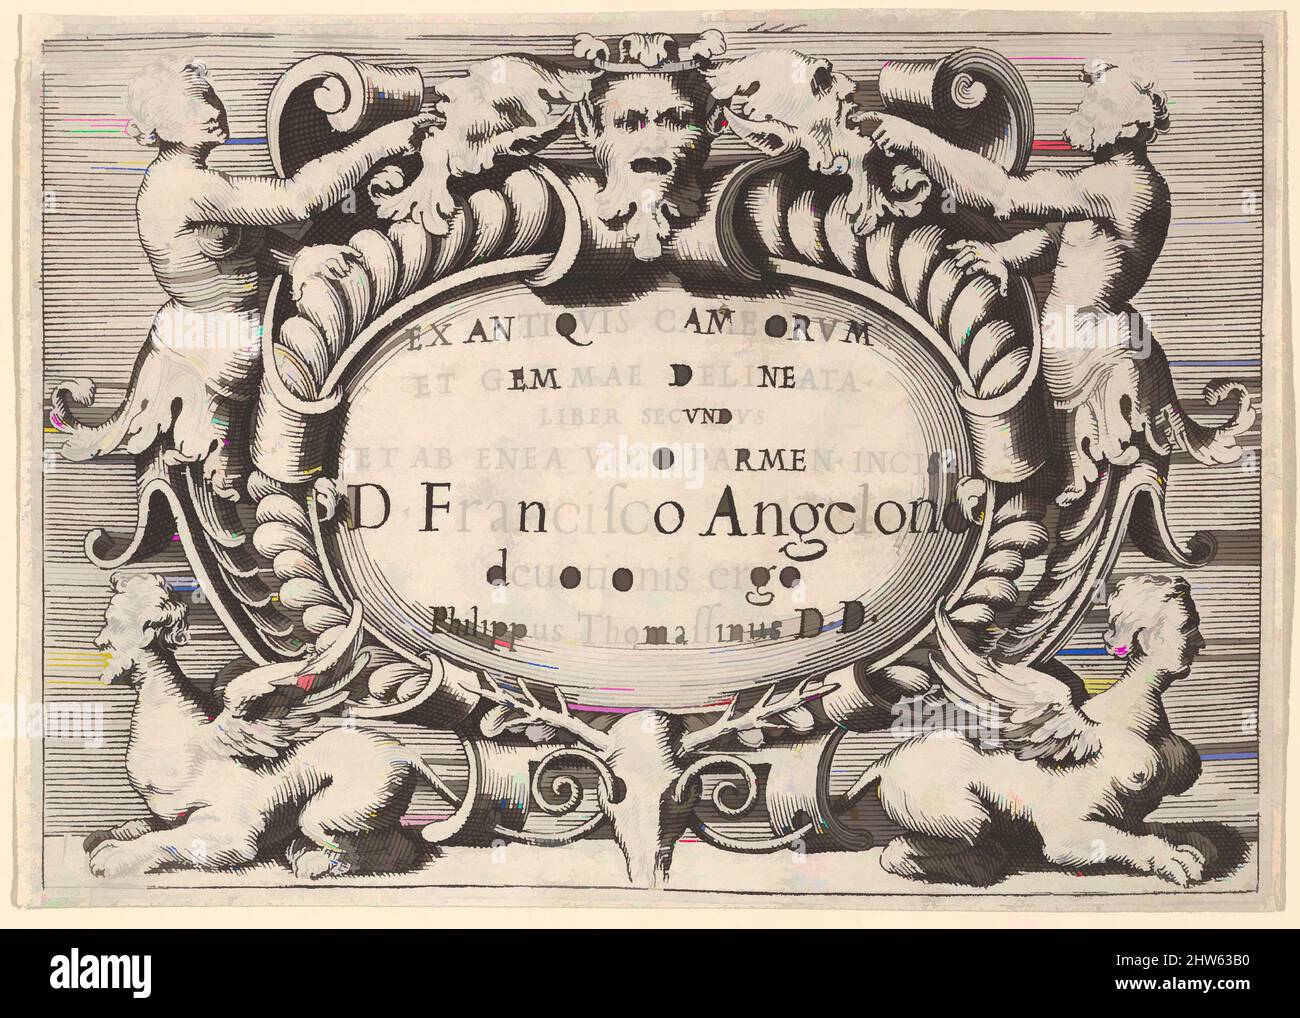 Art inspired by Ex Antiquis Cameorum et Gemmae Delineata/ Liber Secundus/et ab Enea Vico Parmen Incis., published ca. 1599–1622, Engraving. Third state., plate: 3 7/16 x 4 7/8 in. (8.8 x 12.4 cm), Prints, Anonymous, Italian, 16th century, After Battista Franco (Italian, Venice ca. 1510, Classic works modernized by Artotop with a splash of modernity. Shapes, color and value, eye-catching visual impact on art. Emotions through freedom of artworks in a contemporary way. A timeless message pursuing a wildly creative new direction. Artists turning to the digital medium and creating the Artotop NFT Stock Photo